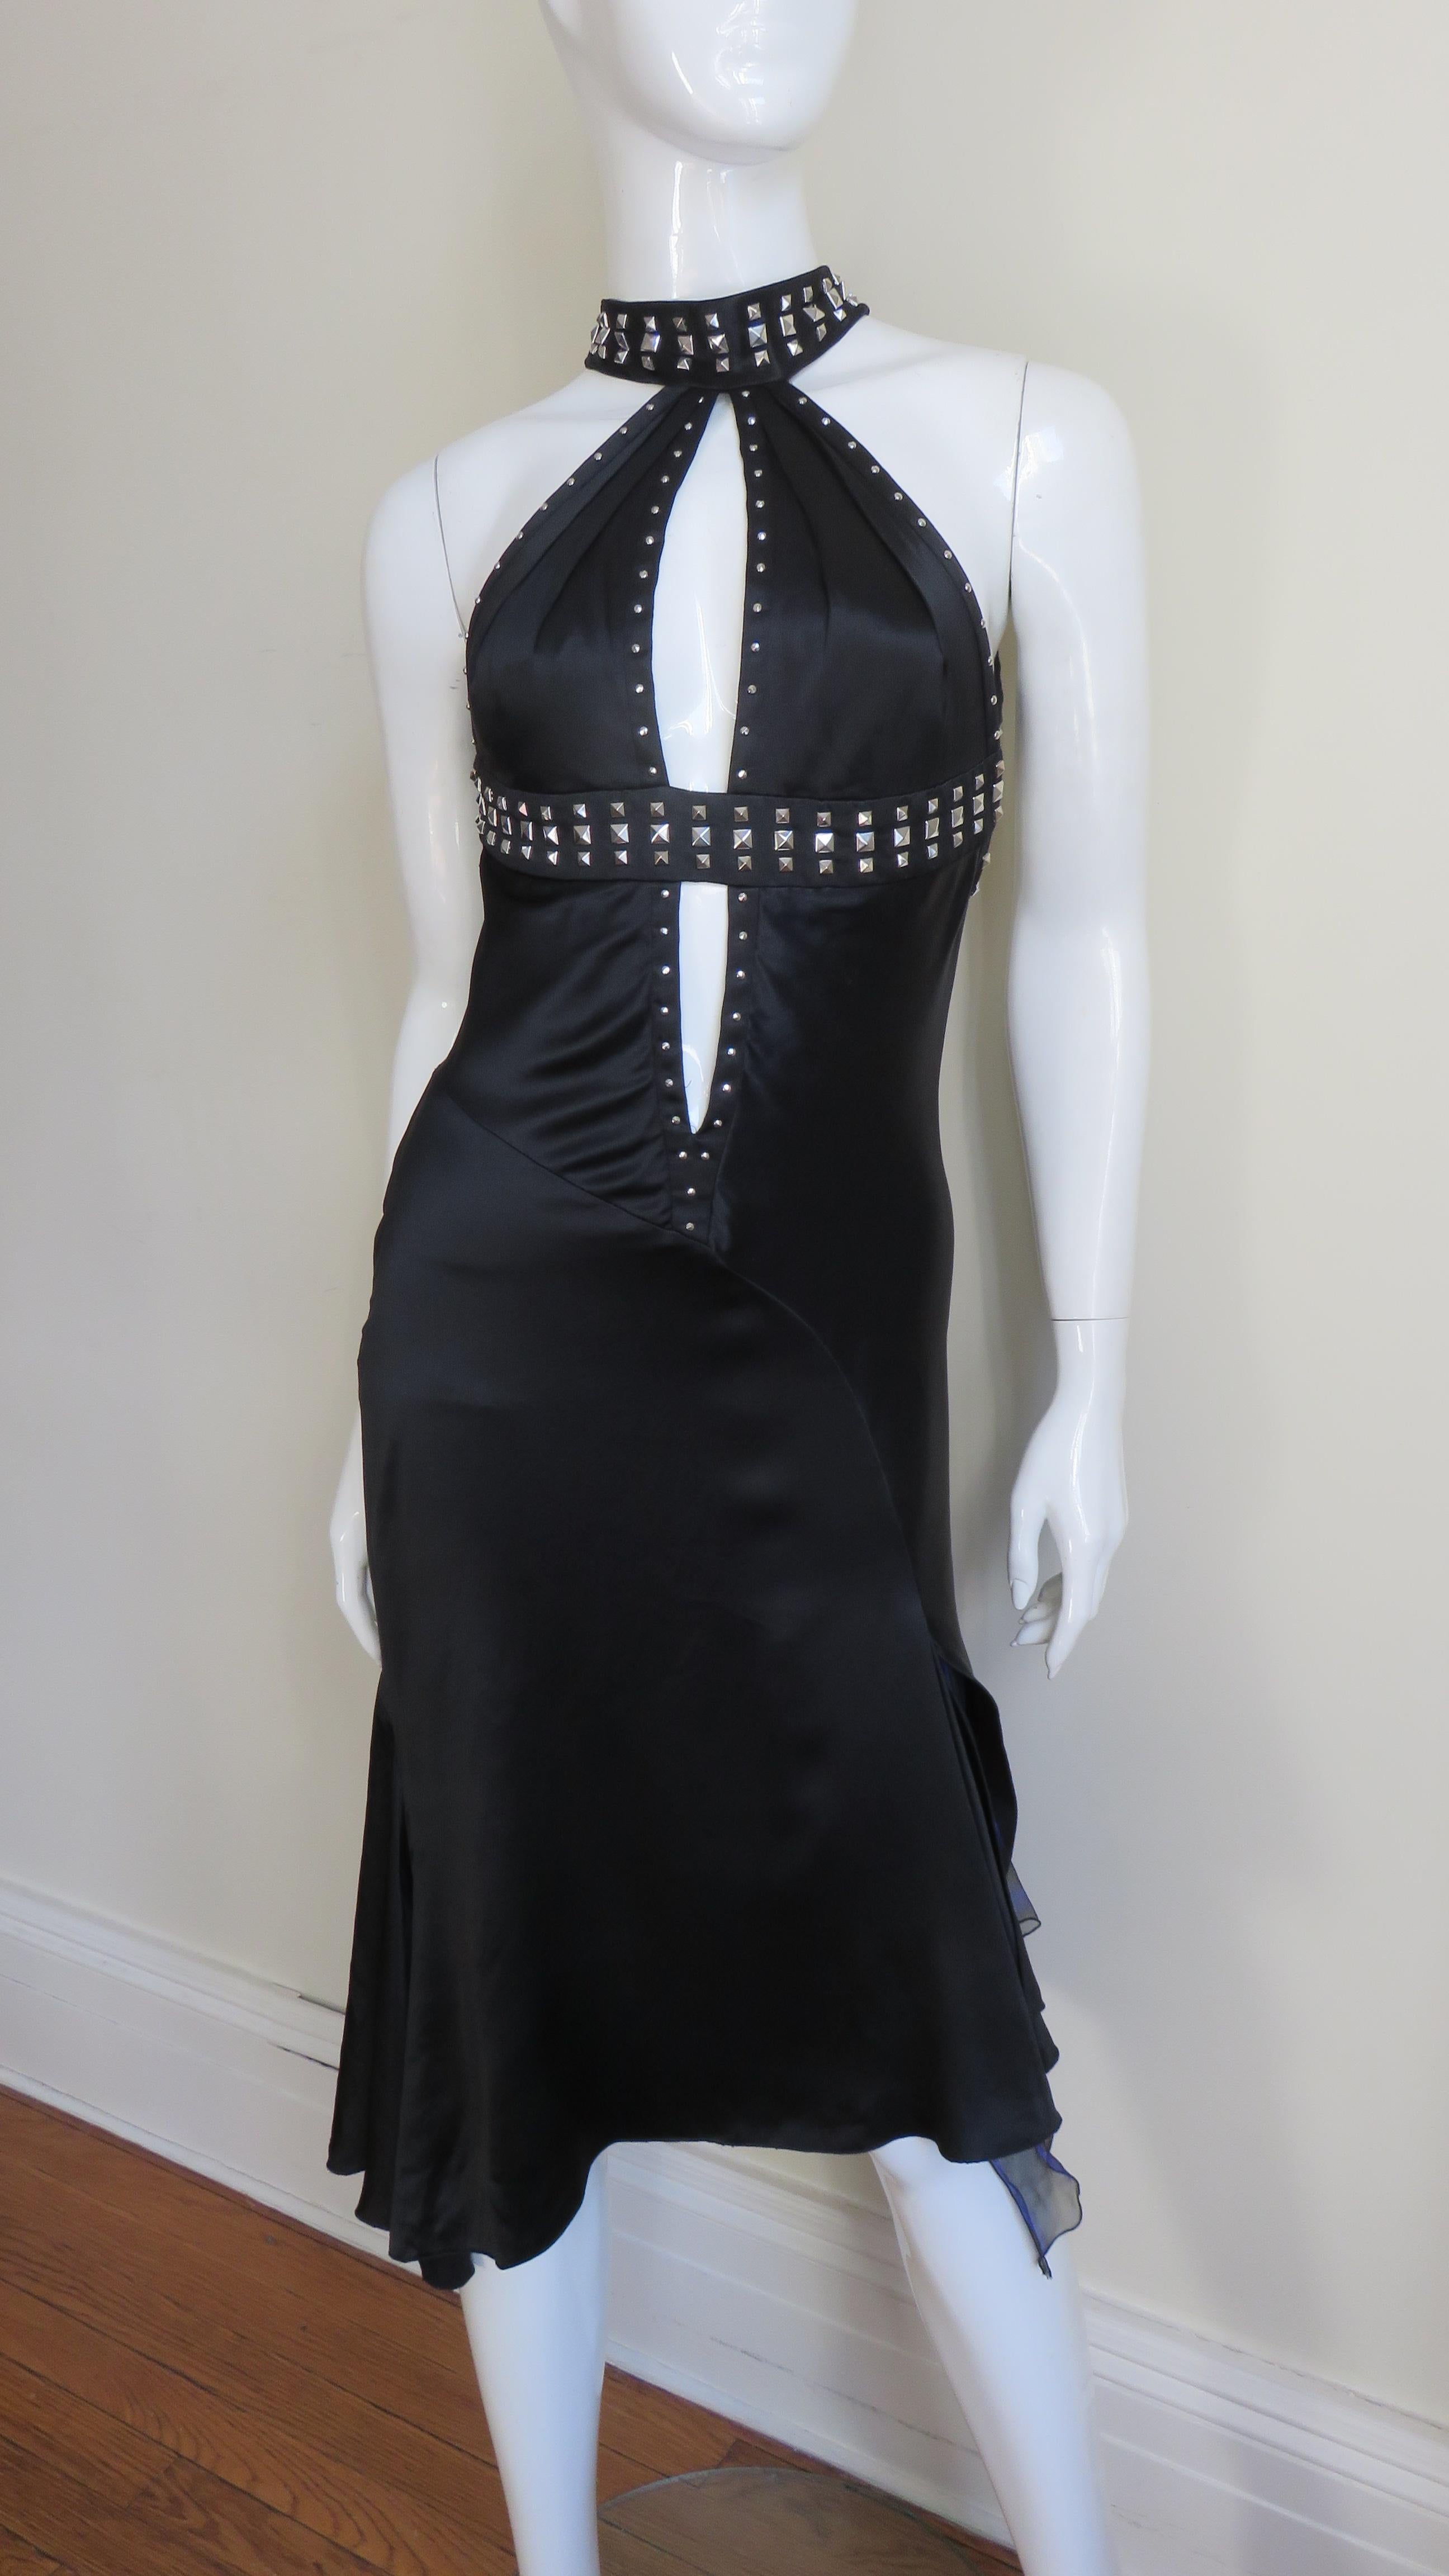 A stunning black silk dress from the Versace S/S 2004 Collection. It has square silver metal studs along the straps which wrap around the neck, crossing the upper back then wrapping under the bust where it divides a center front keyhole outlined in